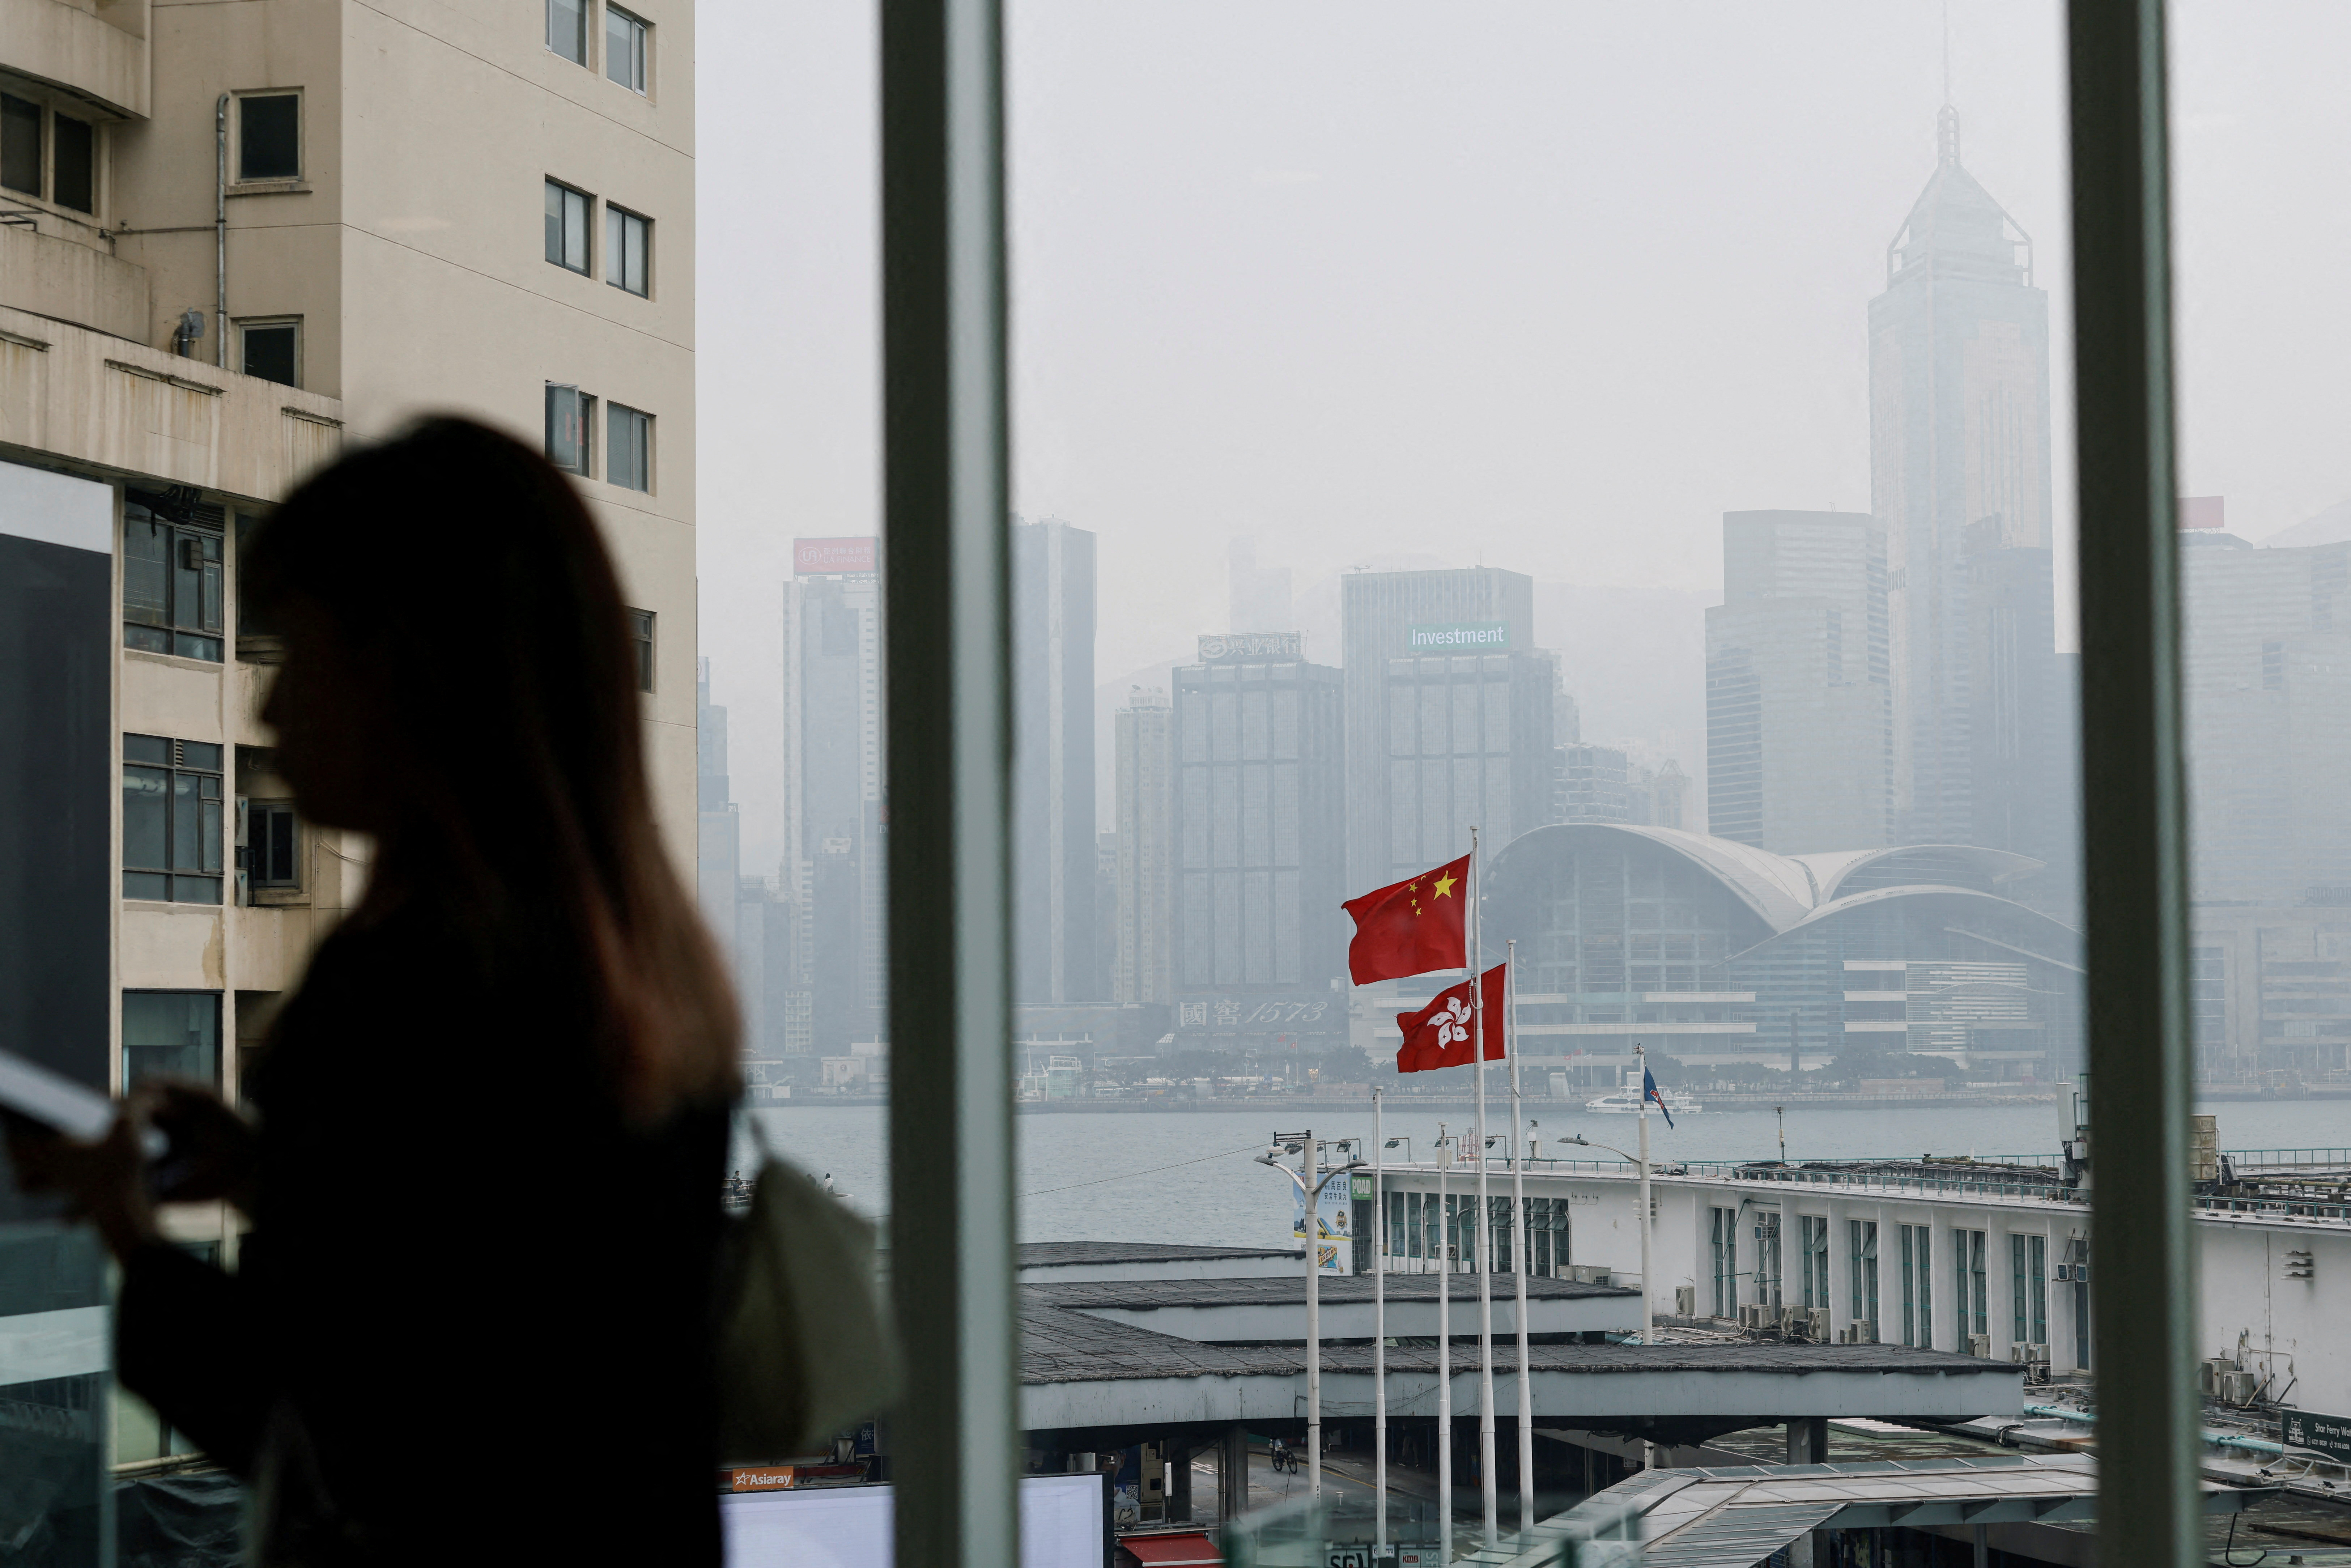 Chinese and Hong Kong flags are seen at the waterfront during a foggy day in Hong Kong